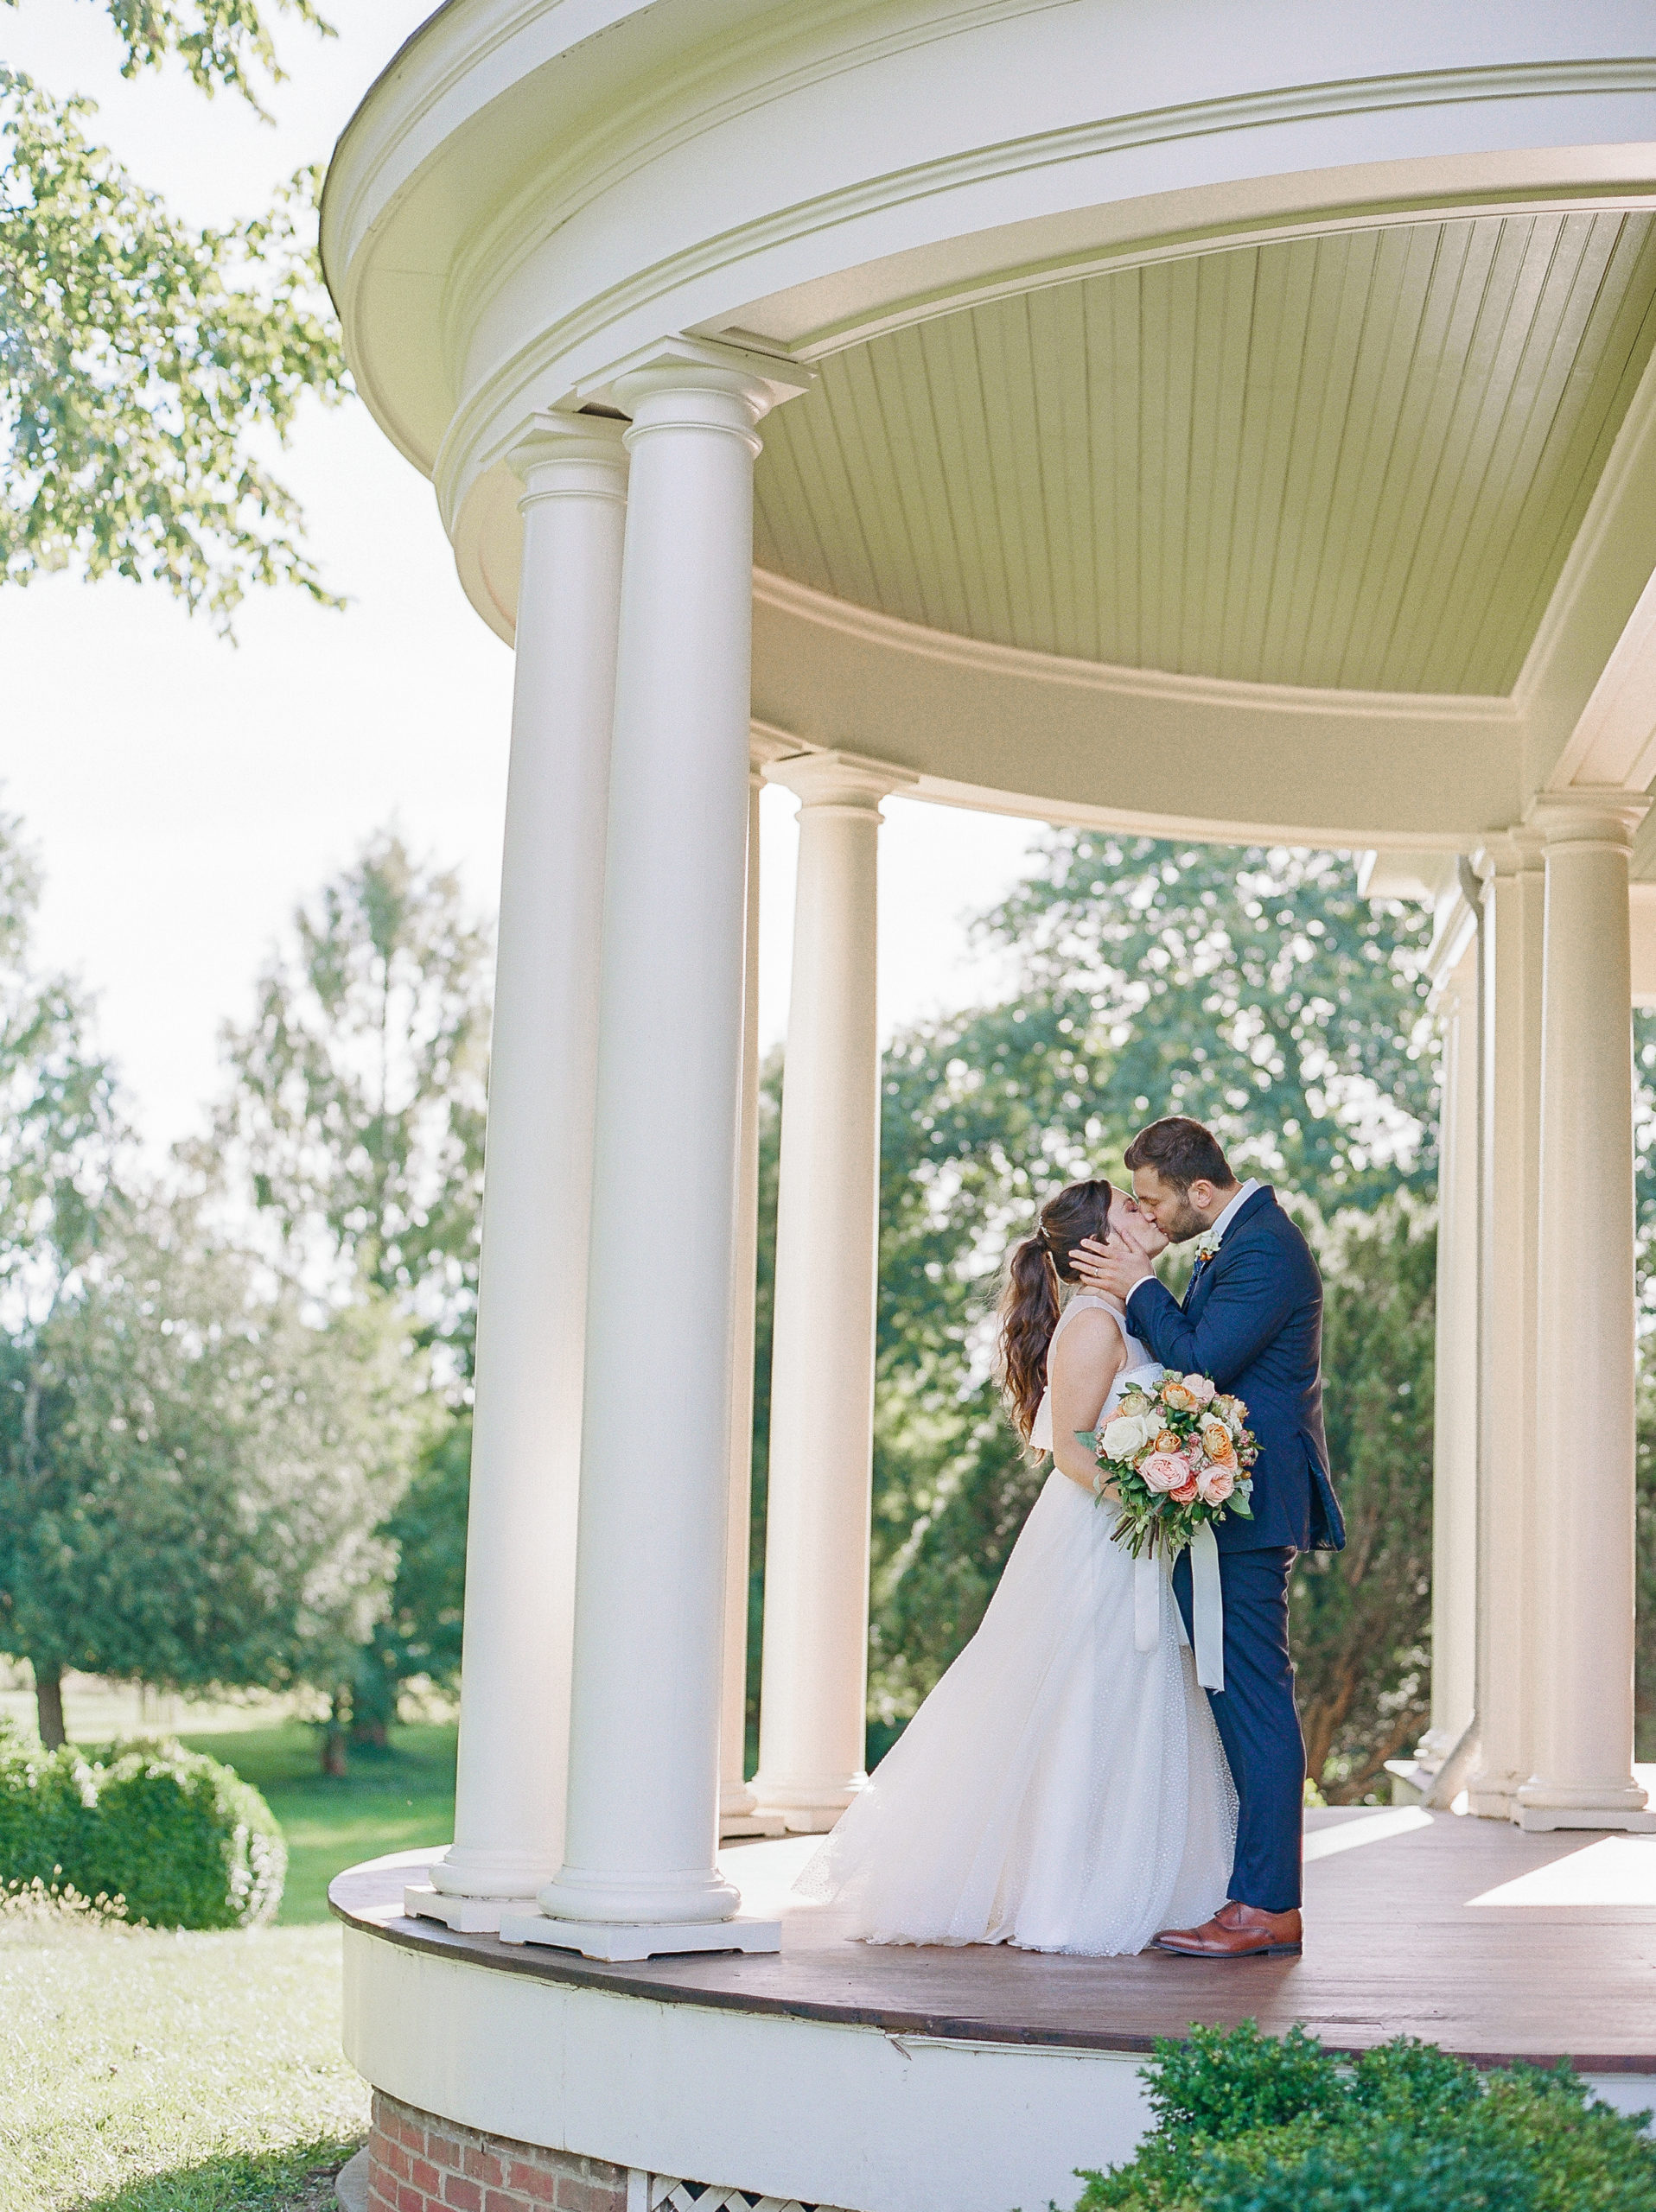 Bride and groom kiss on rotunda porch surrounded by treesNJ Private Estate Wedding Photography